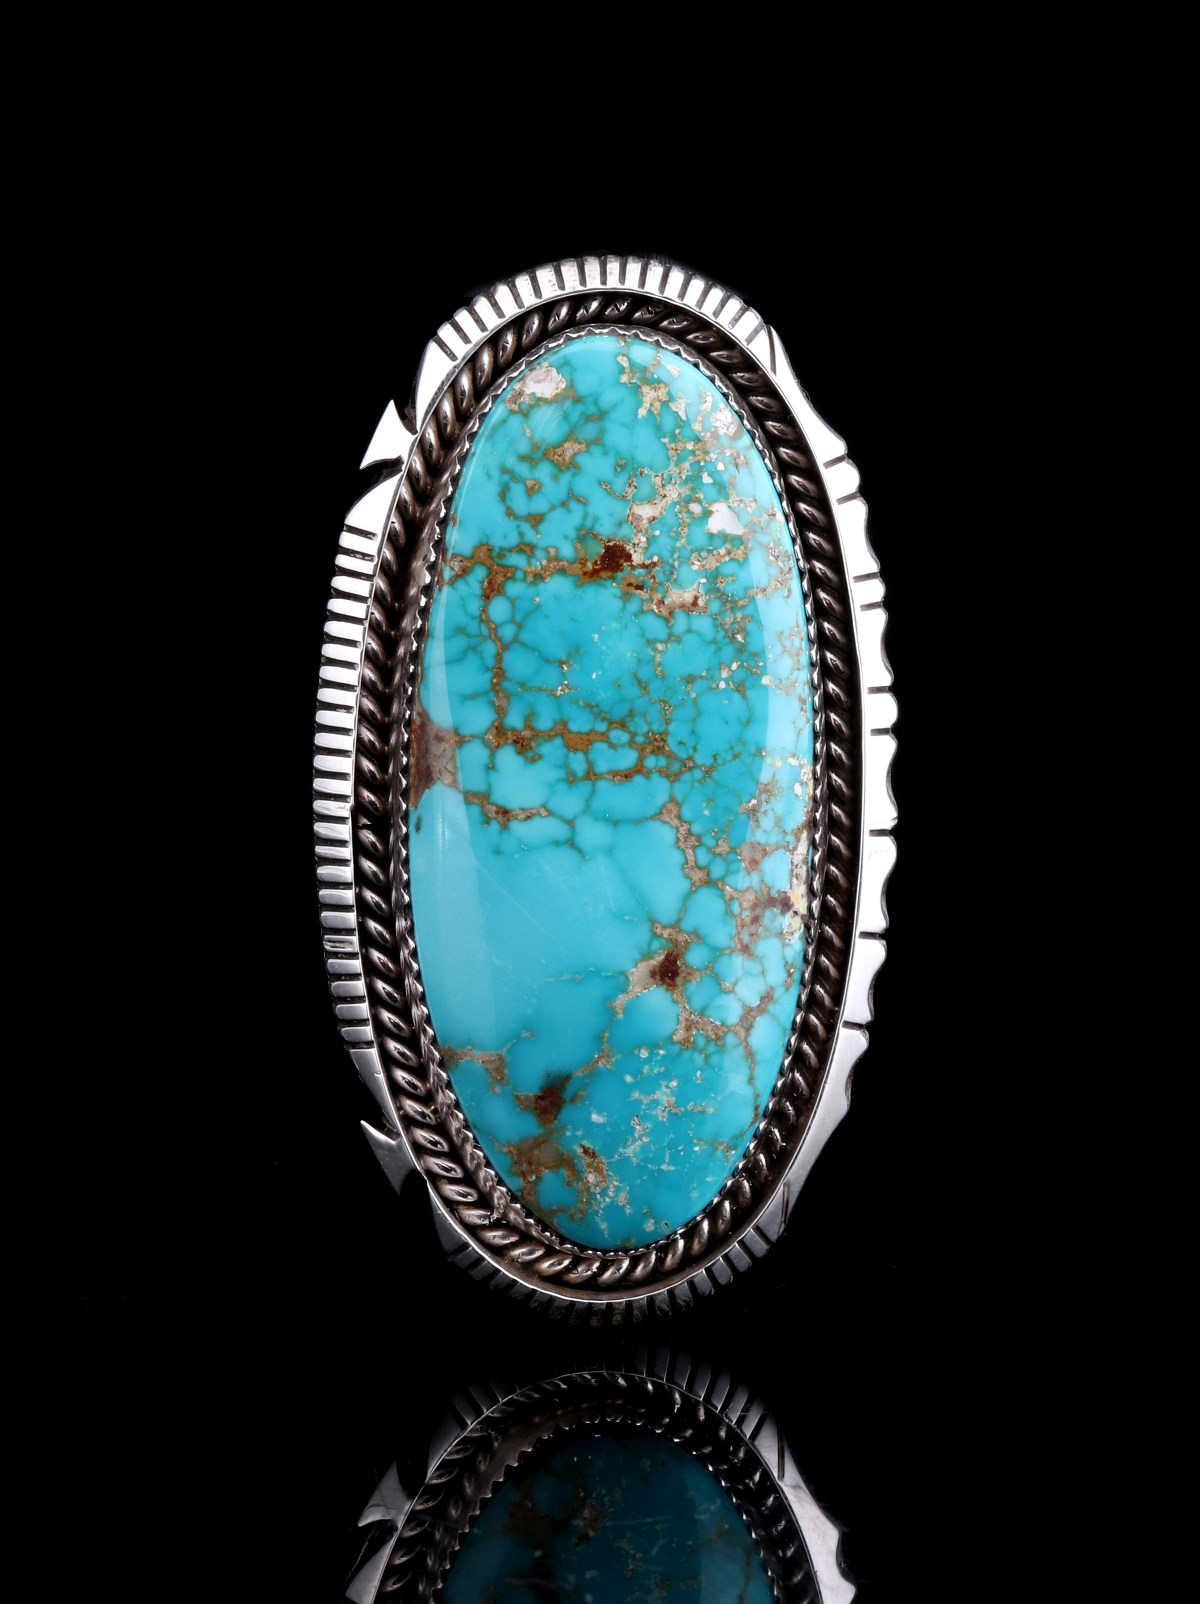 AN AUGUSTINE LARGO AMERICAN TURQUOISE RING